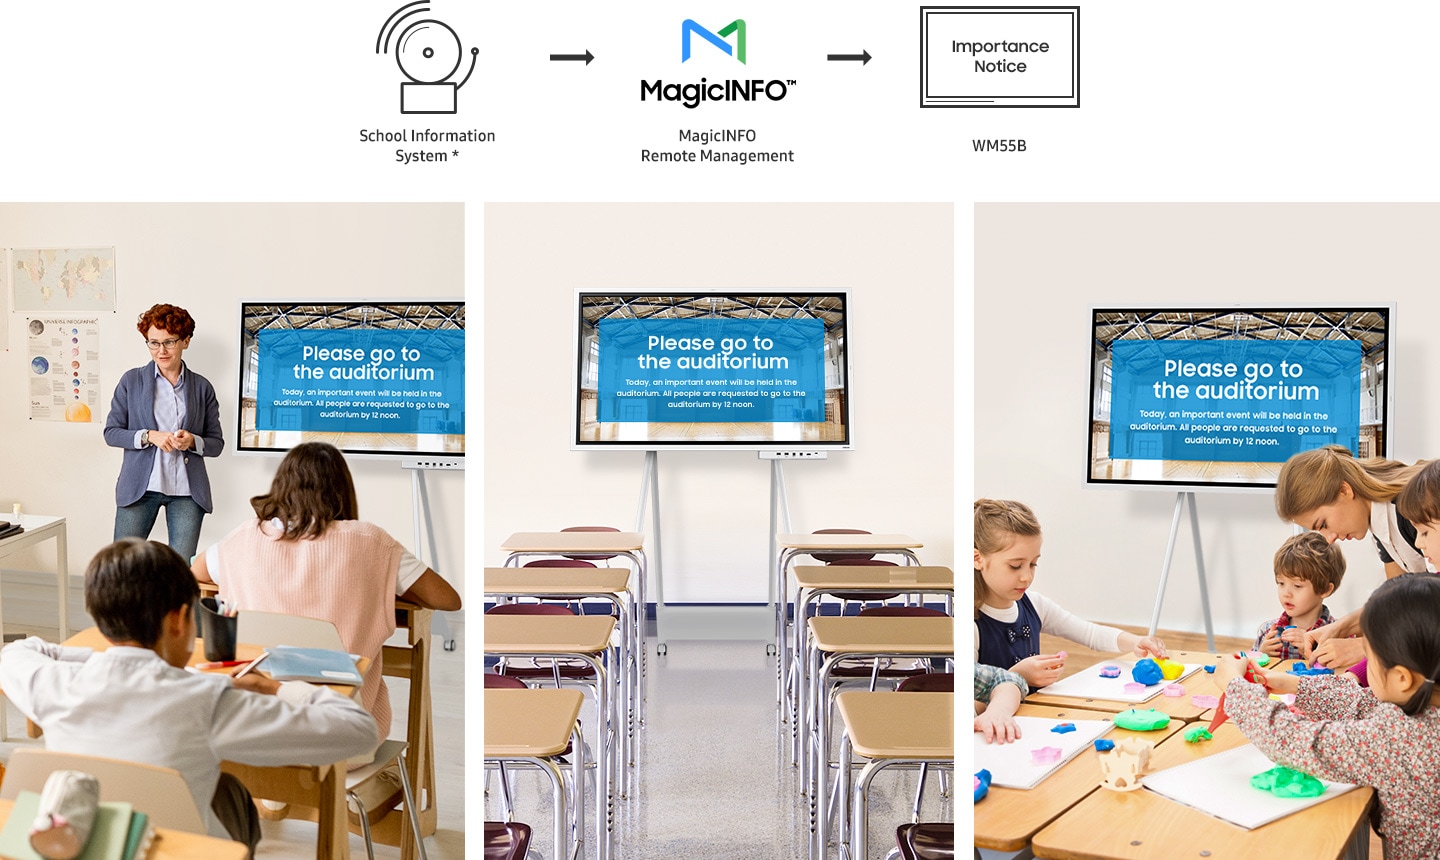 The School information system* is simultaneously displaying the Importance notice on Flip Pro installed in different classrooms through Magicinfo remote management.